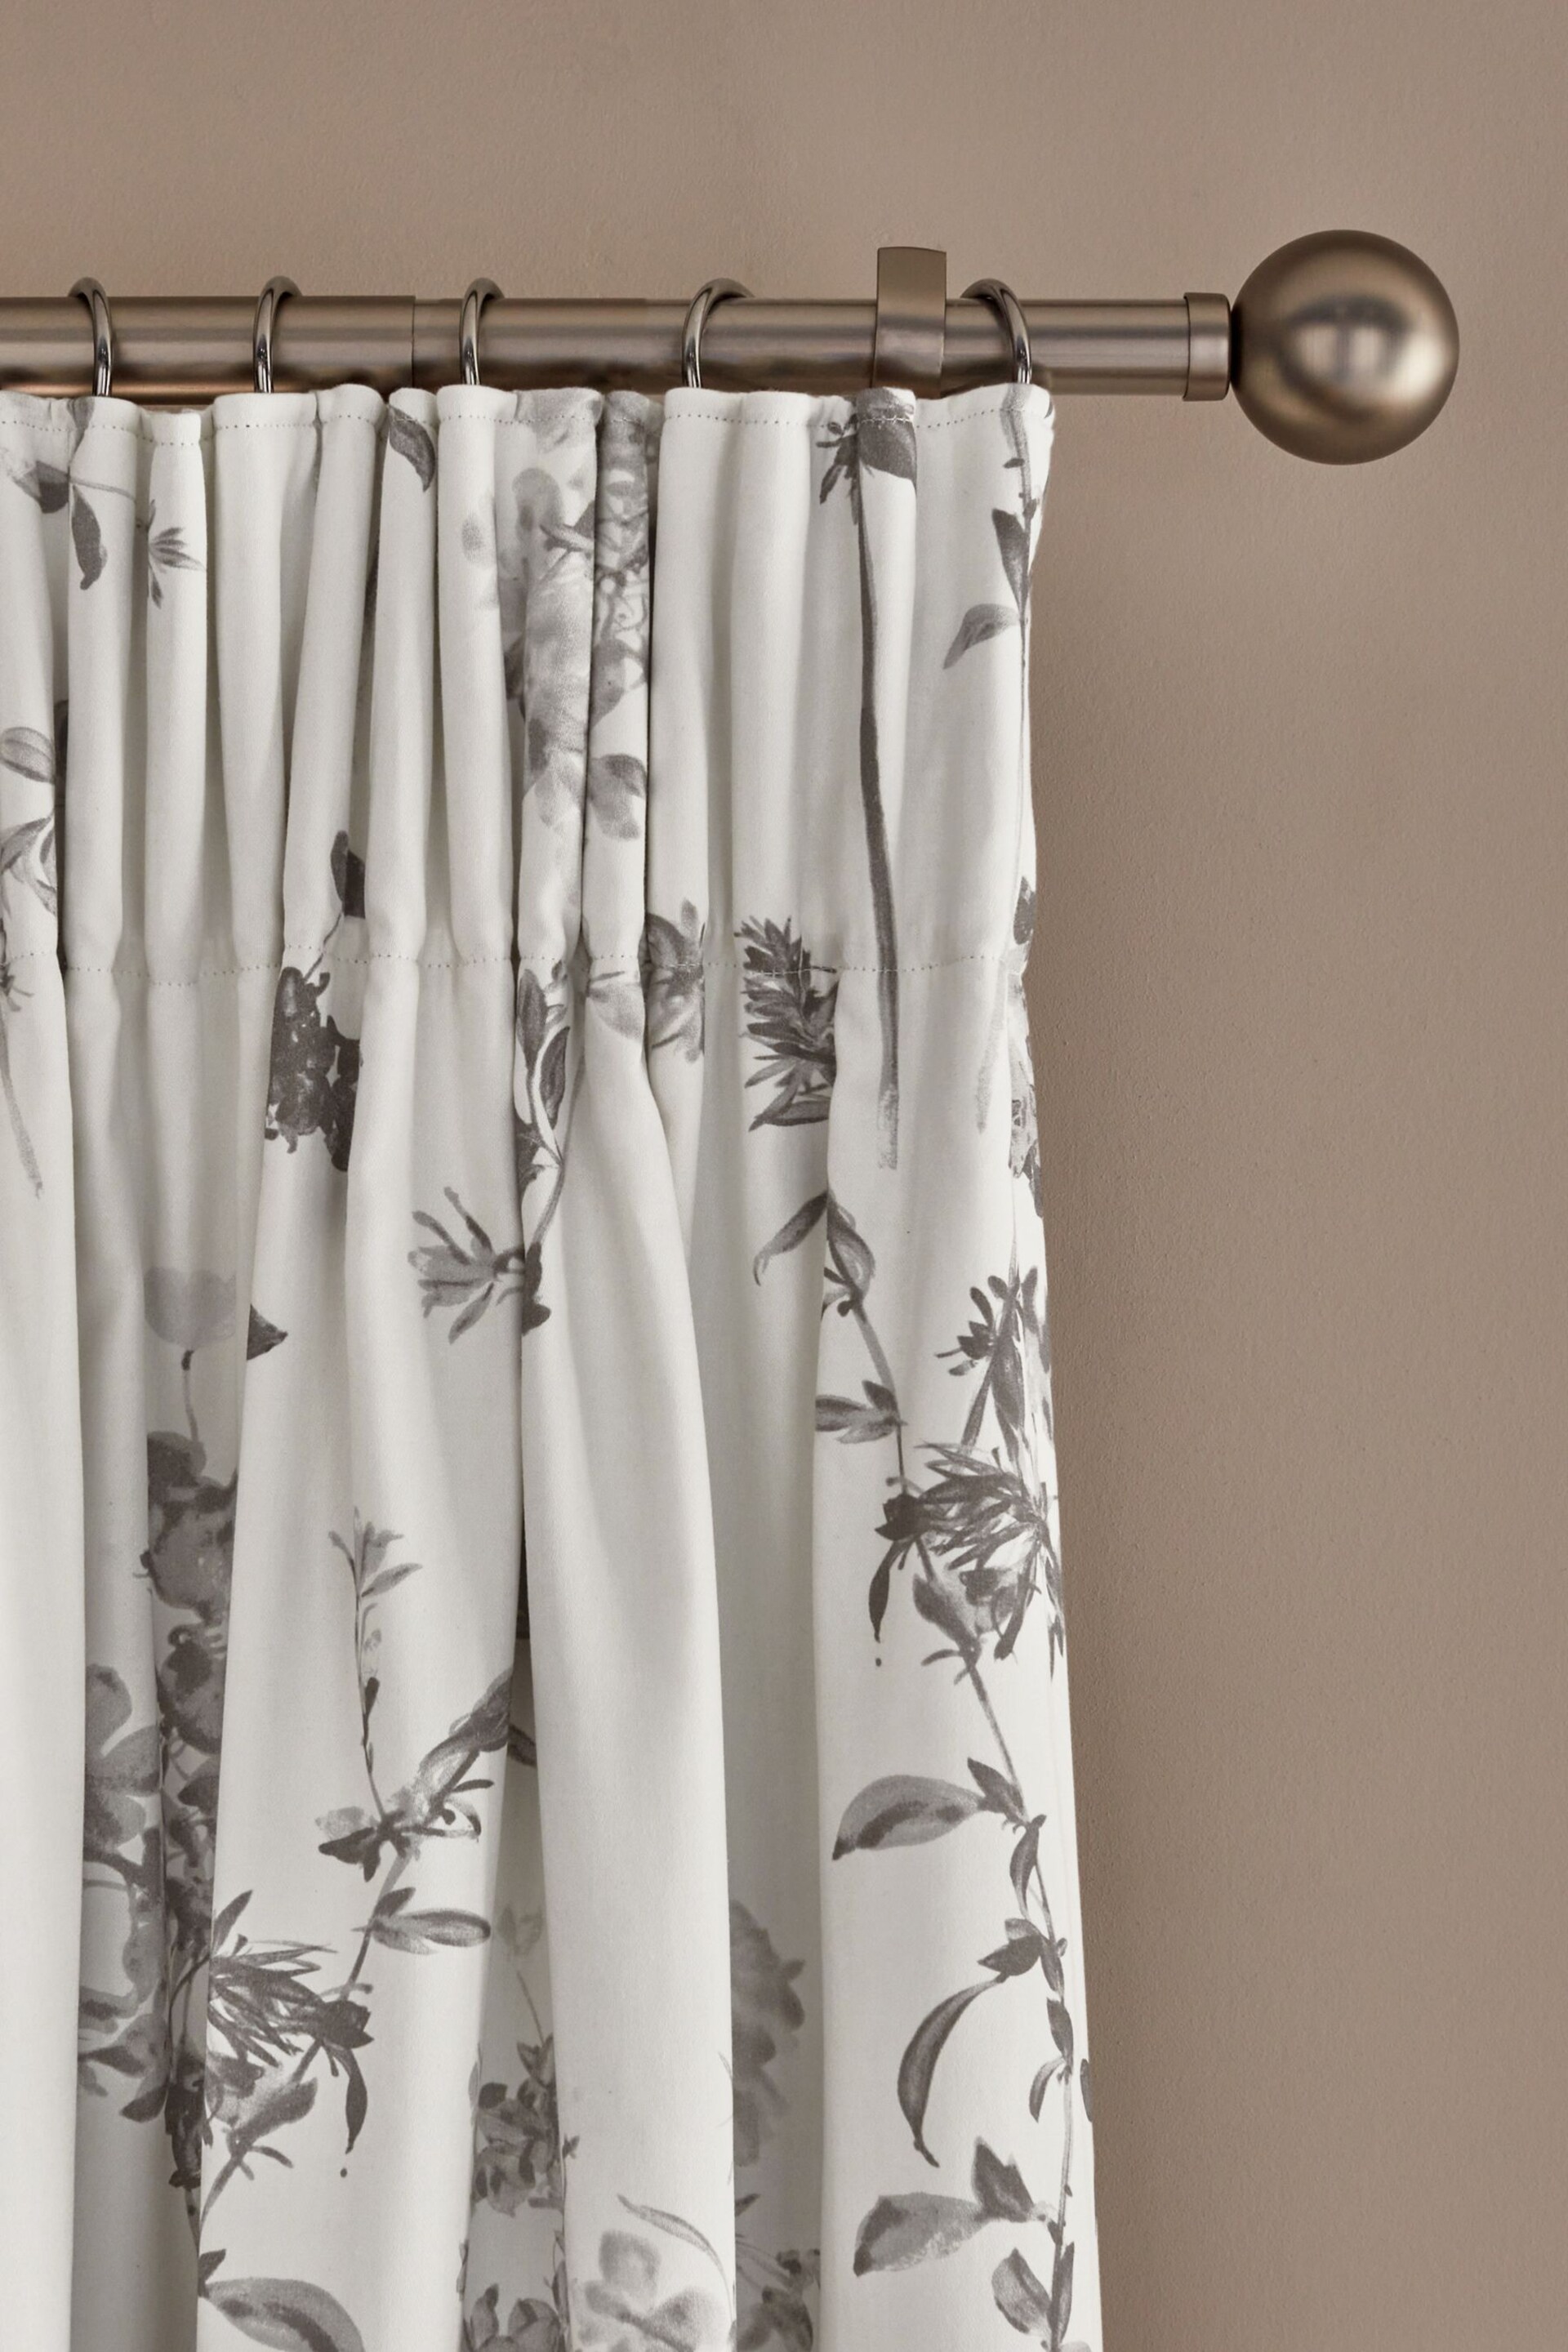 Grey Floral Pencil Pleat Blackout/Thermal Curtains - Image 5 of 9